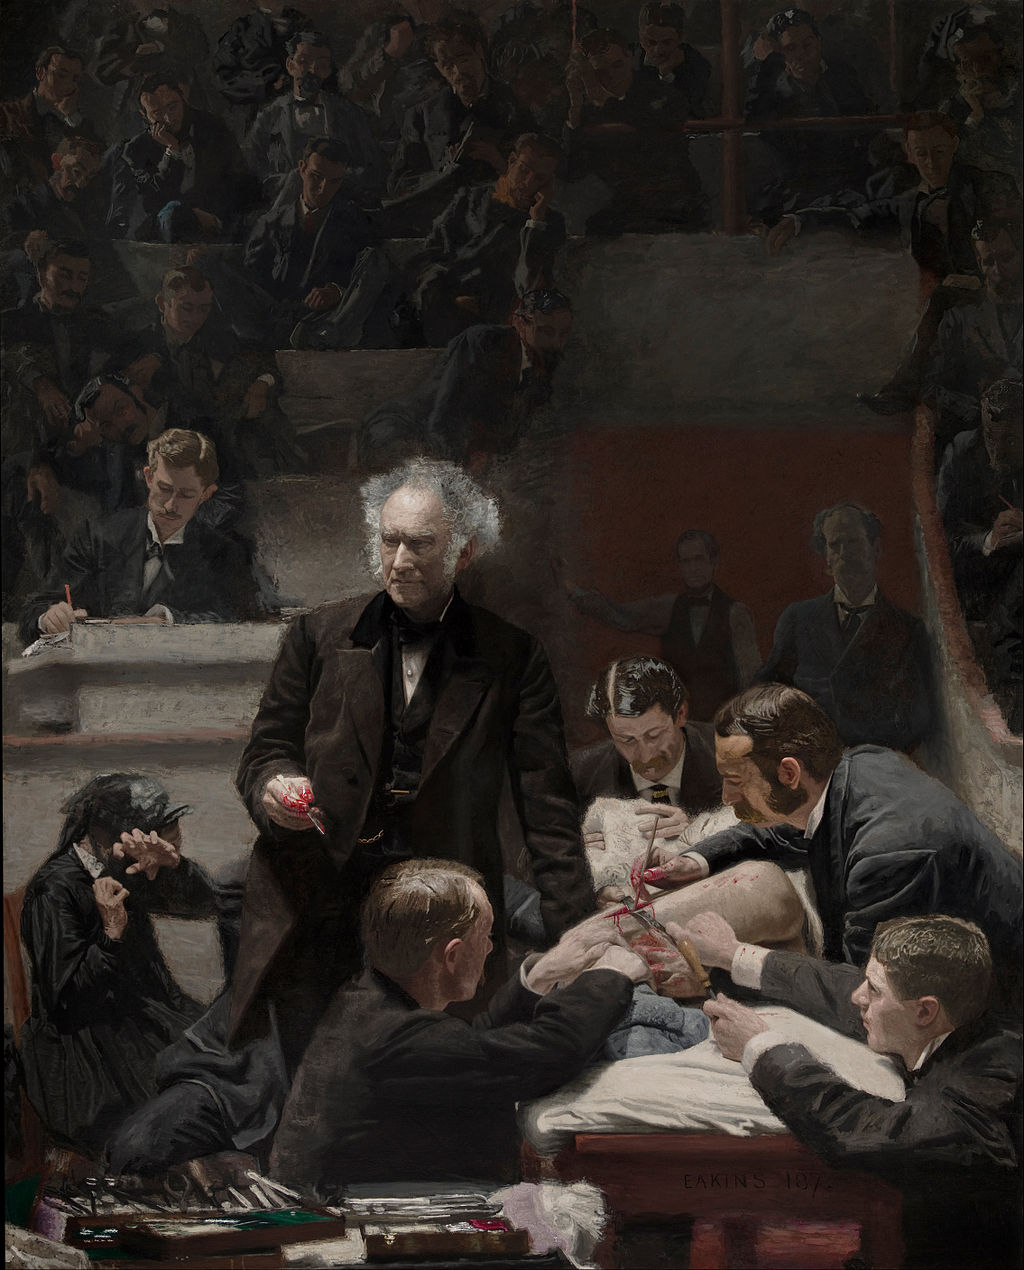 A wall of darkened spectators frame the background as the light illuminates a group of men cutting into a sedated figure (obscured by leaning figures and cloths) as part of a medical class circa 1875